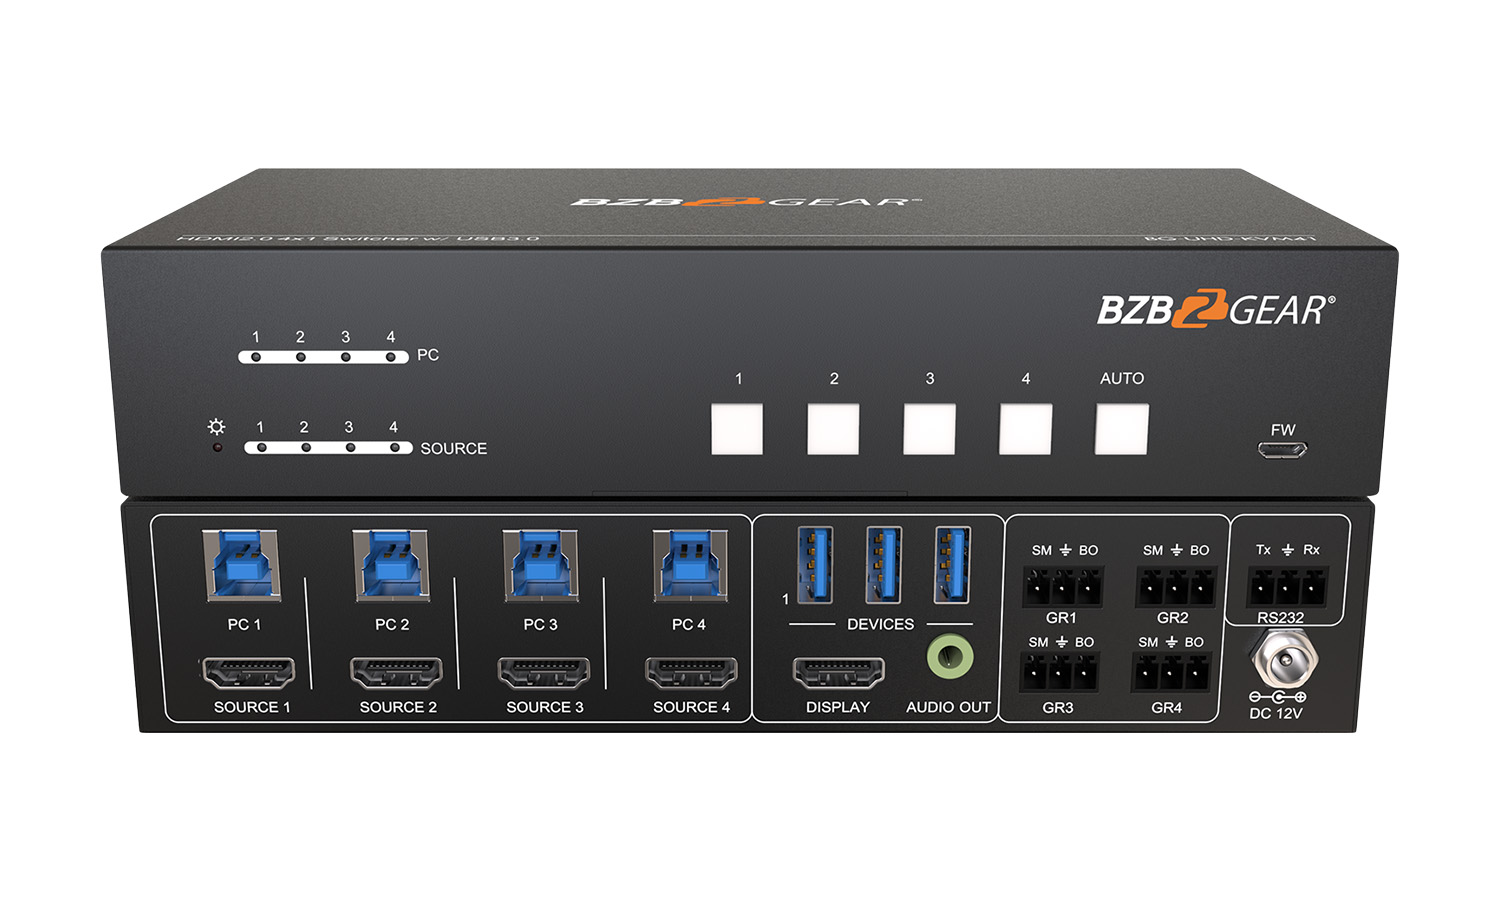 BZBGEAR BG-UHD-KVM41 4-Port 4K UHD KVM and Conference Room Switcher with HDMI and USB 3.0